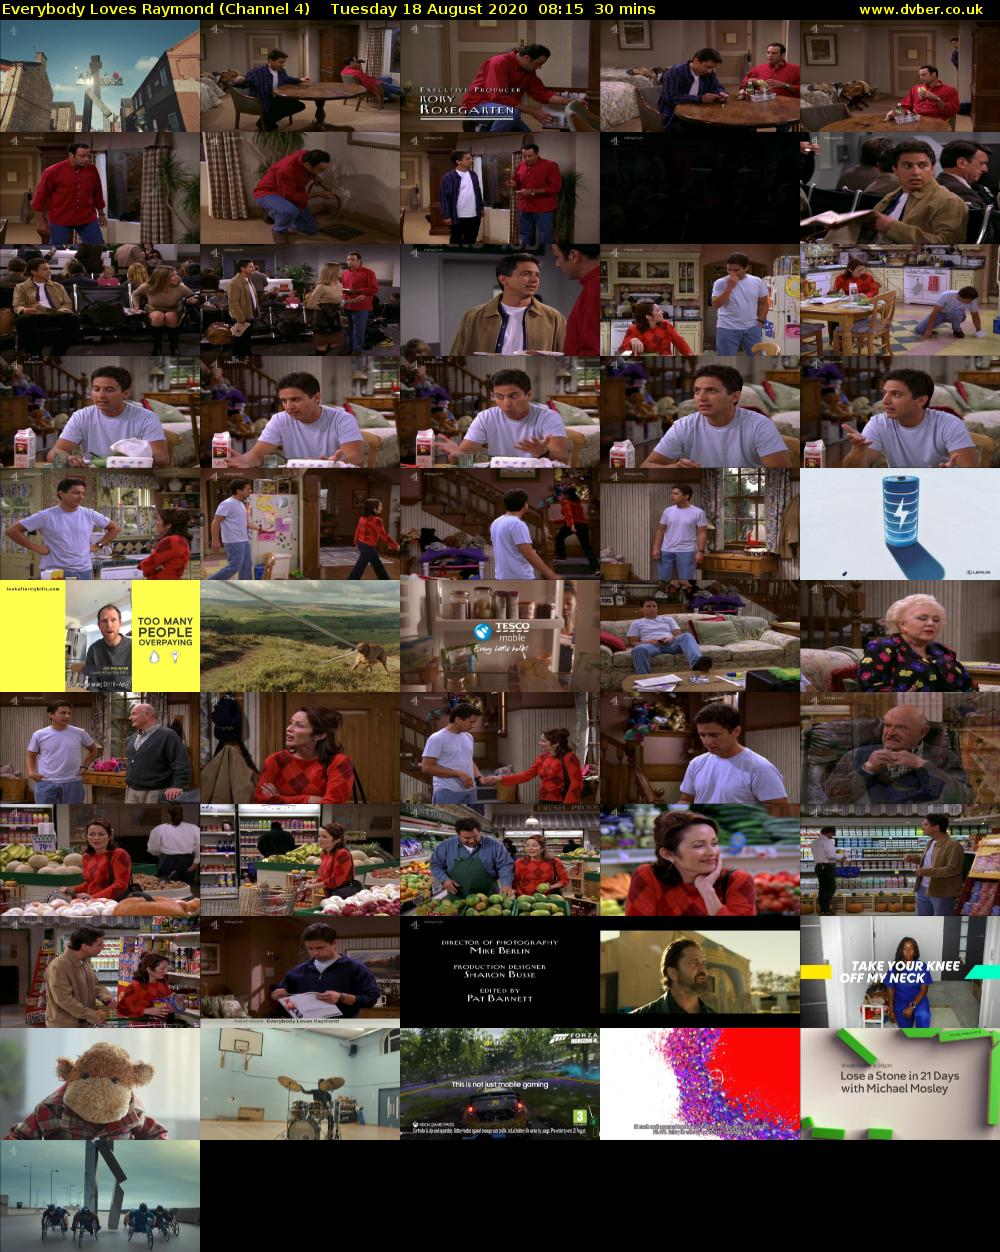 Everybody Loves Raymond (Channel 4) Tuesday 18 August 2020 08:15 - 08:45